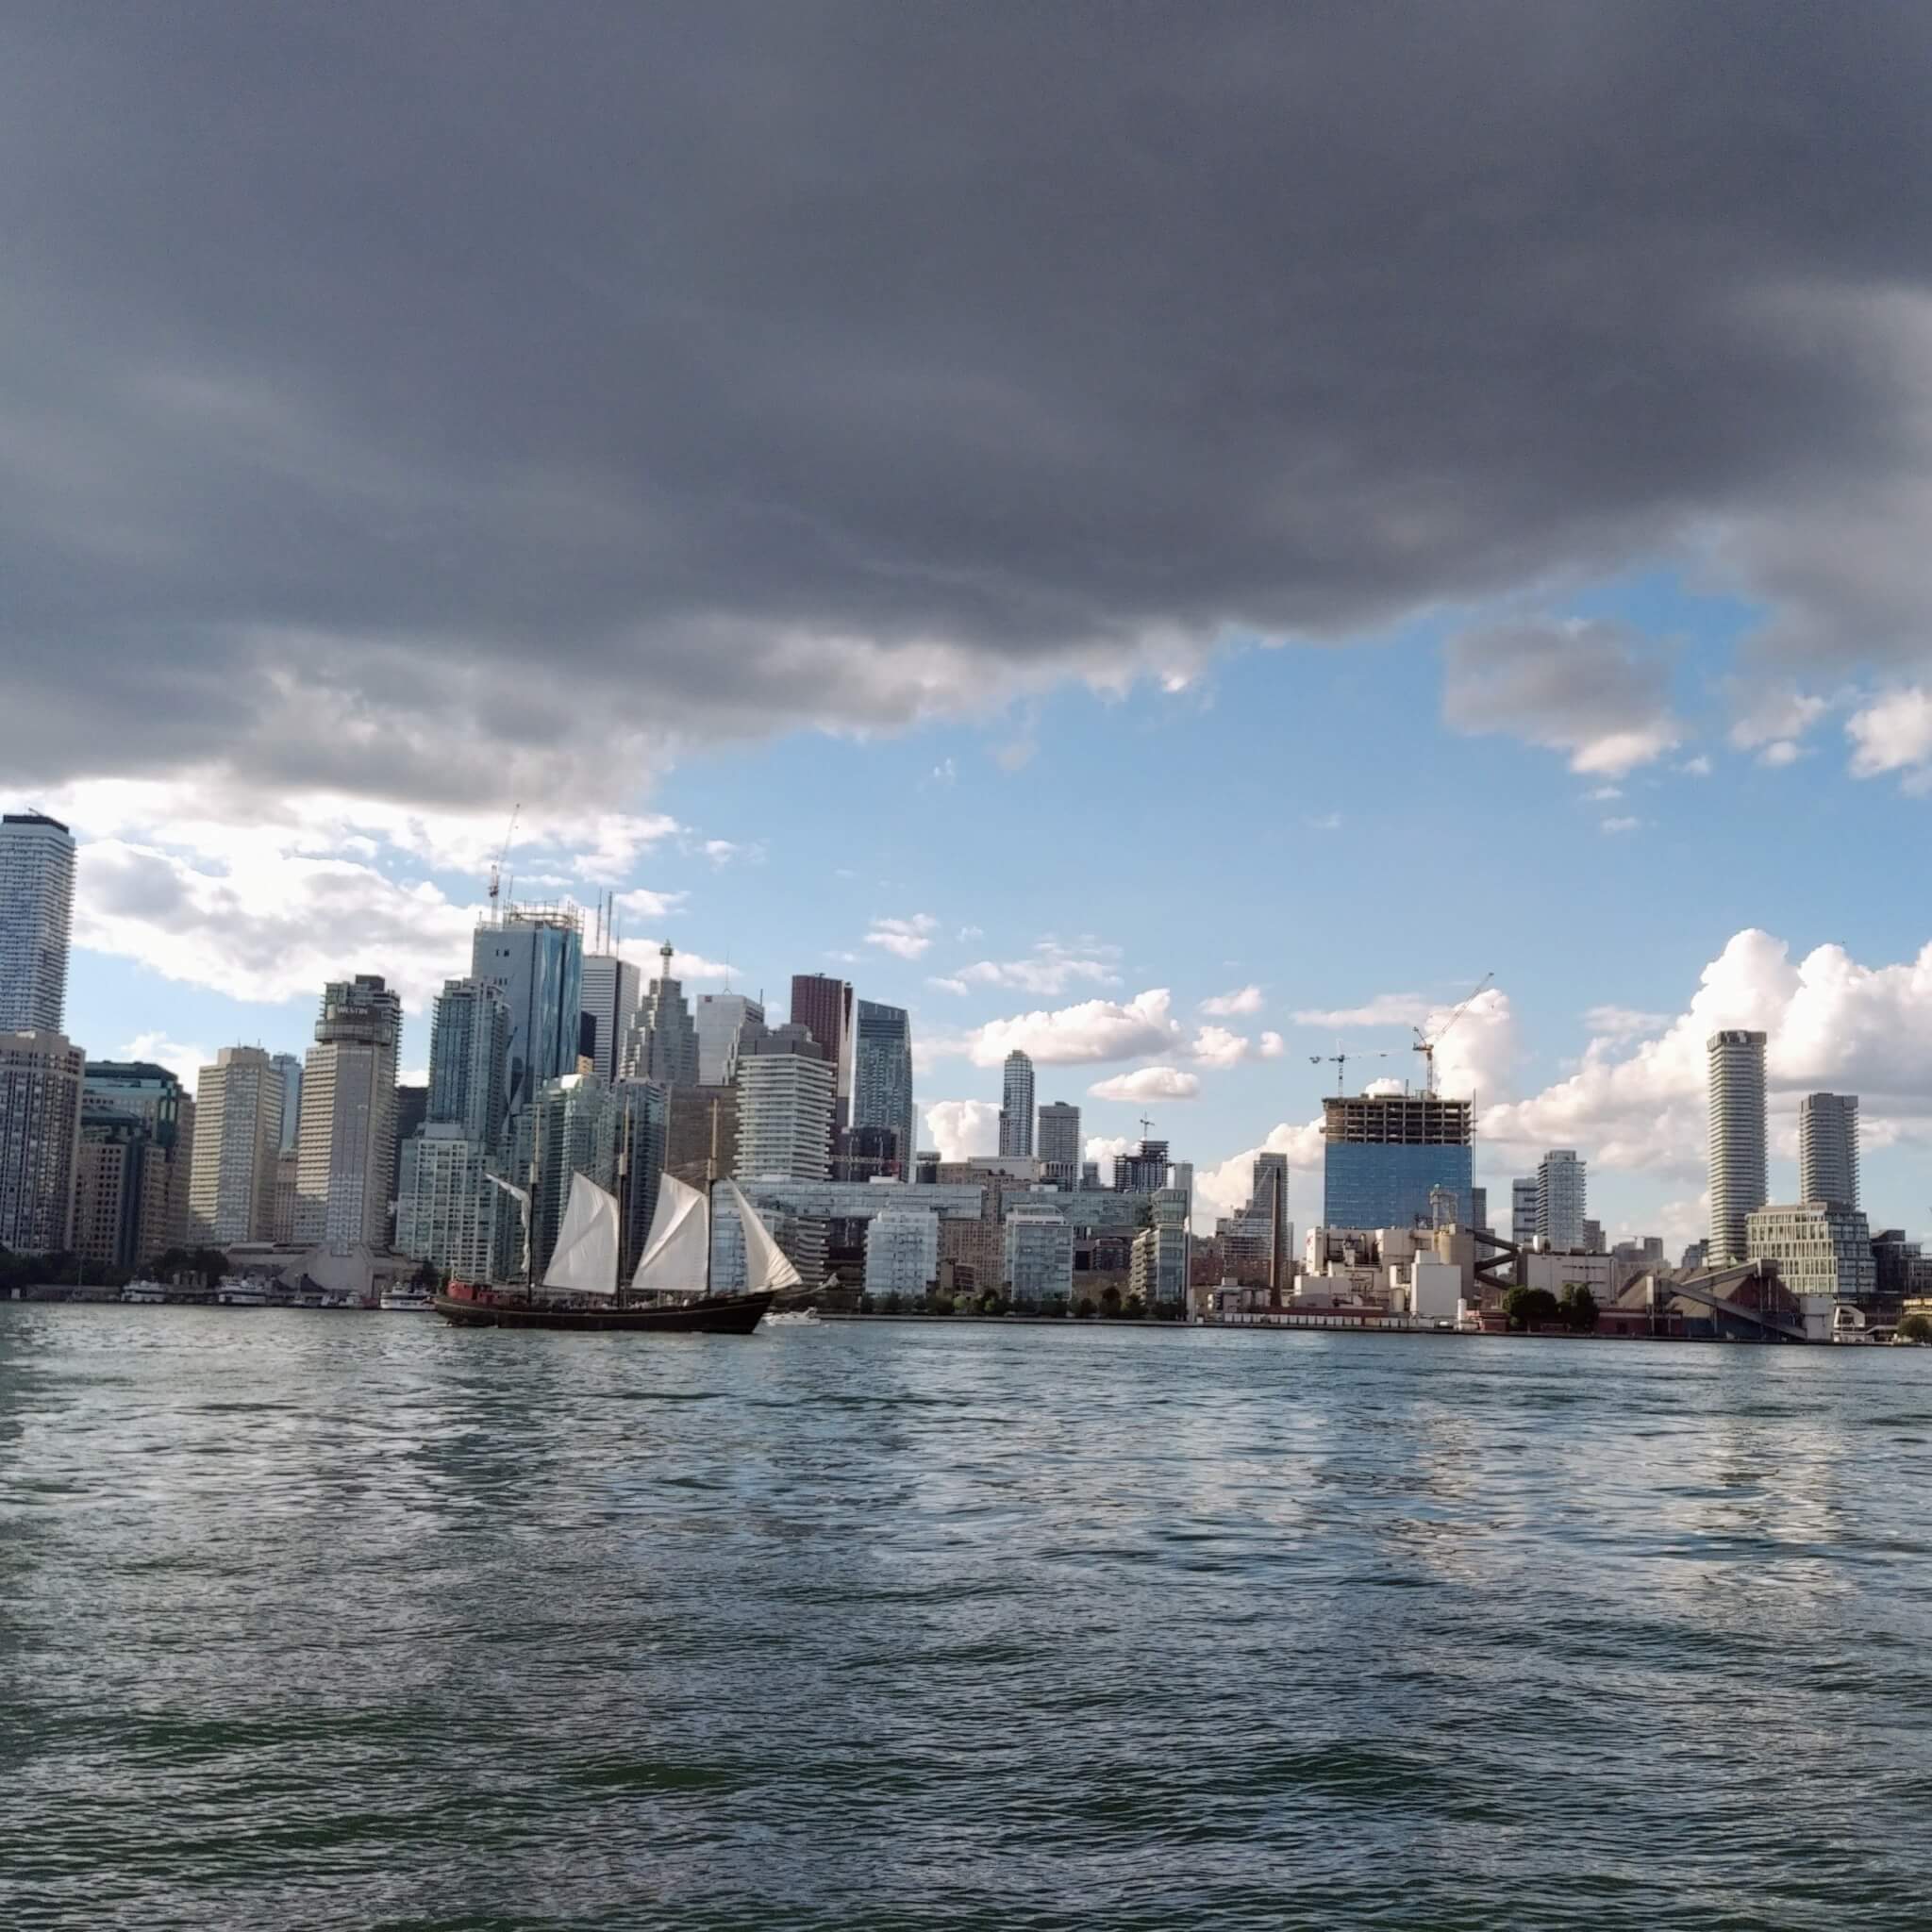 Toronto skyline from a boat in the inner harbout